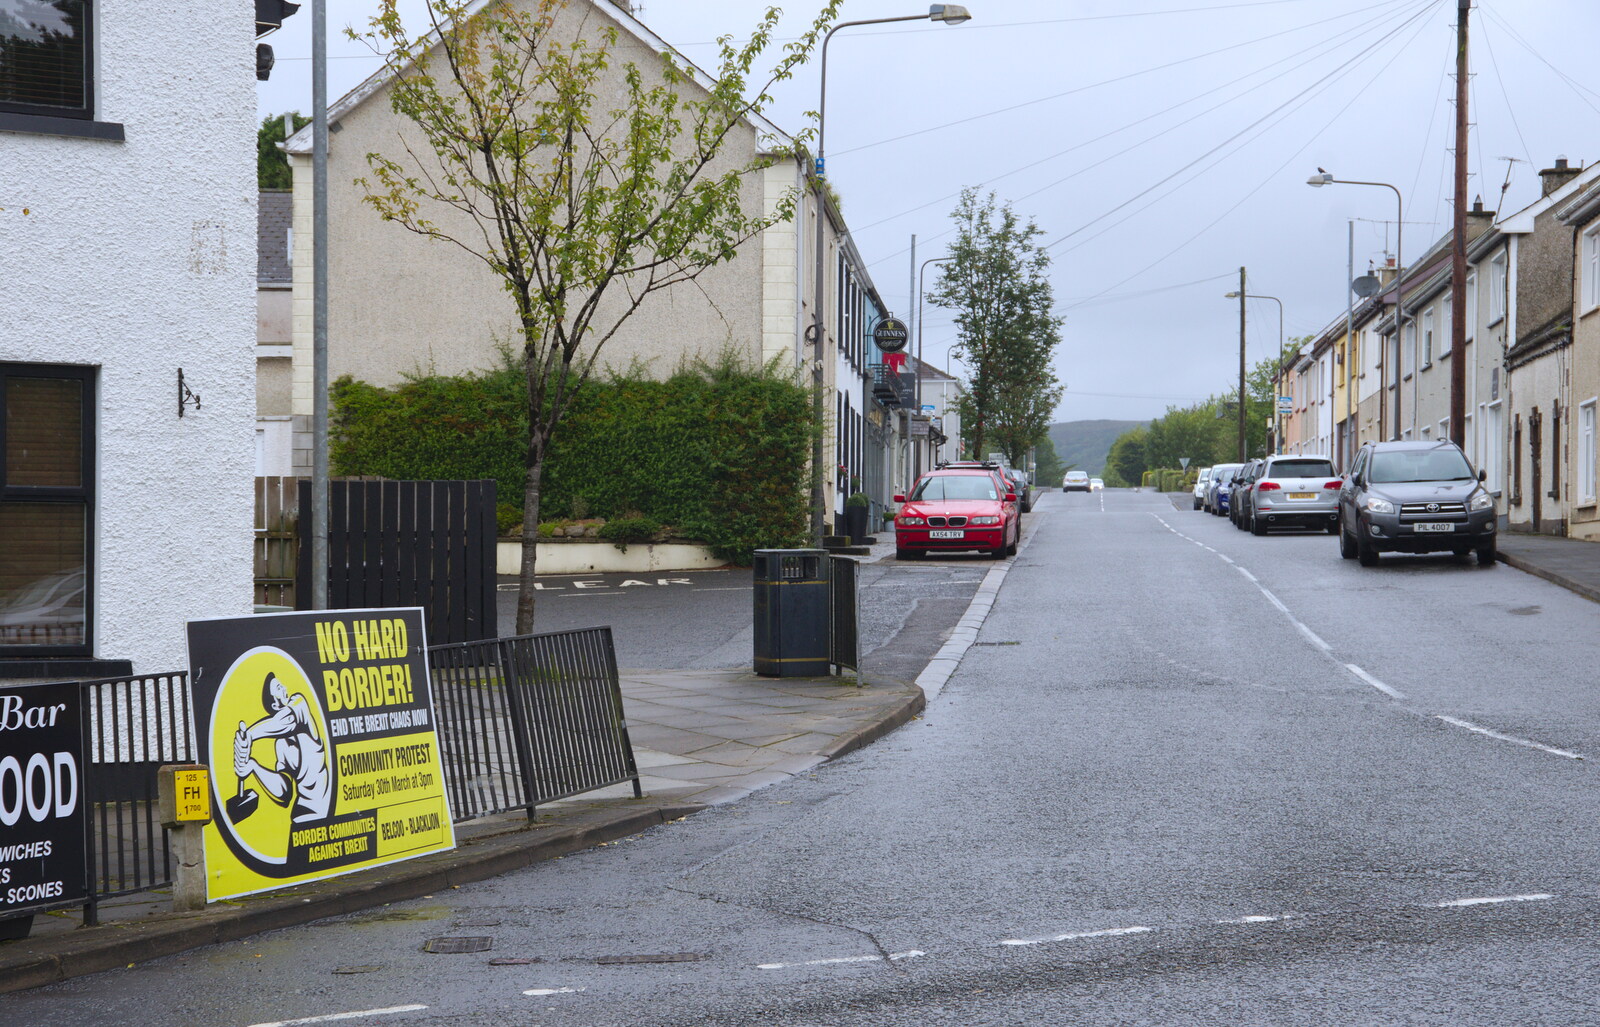 Another anti-Brexit poster in Belcoo from Travels in the Borderlands: An Blaic/Blacklion to Belcoo and back, Cavan and Fermanagh, Ireland - 22nd August 2019